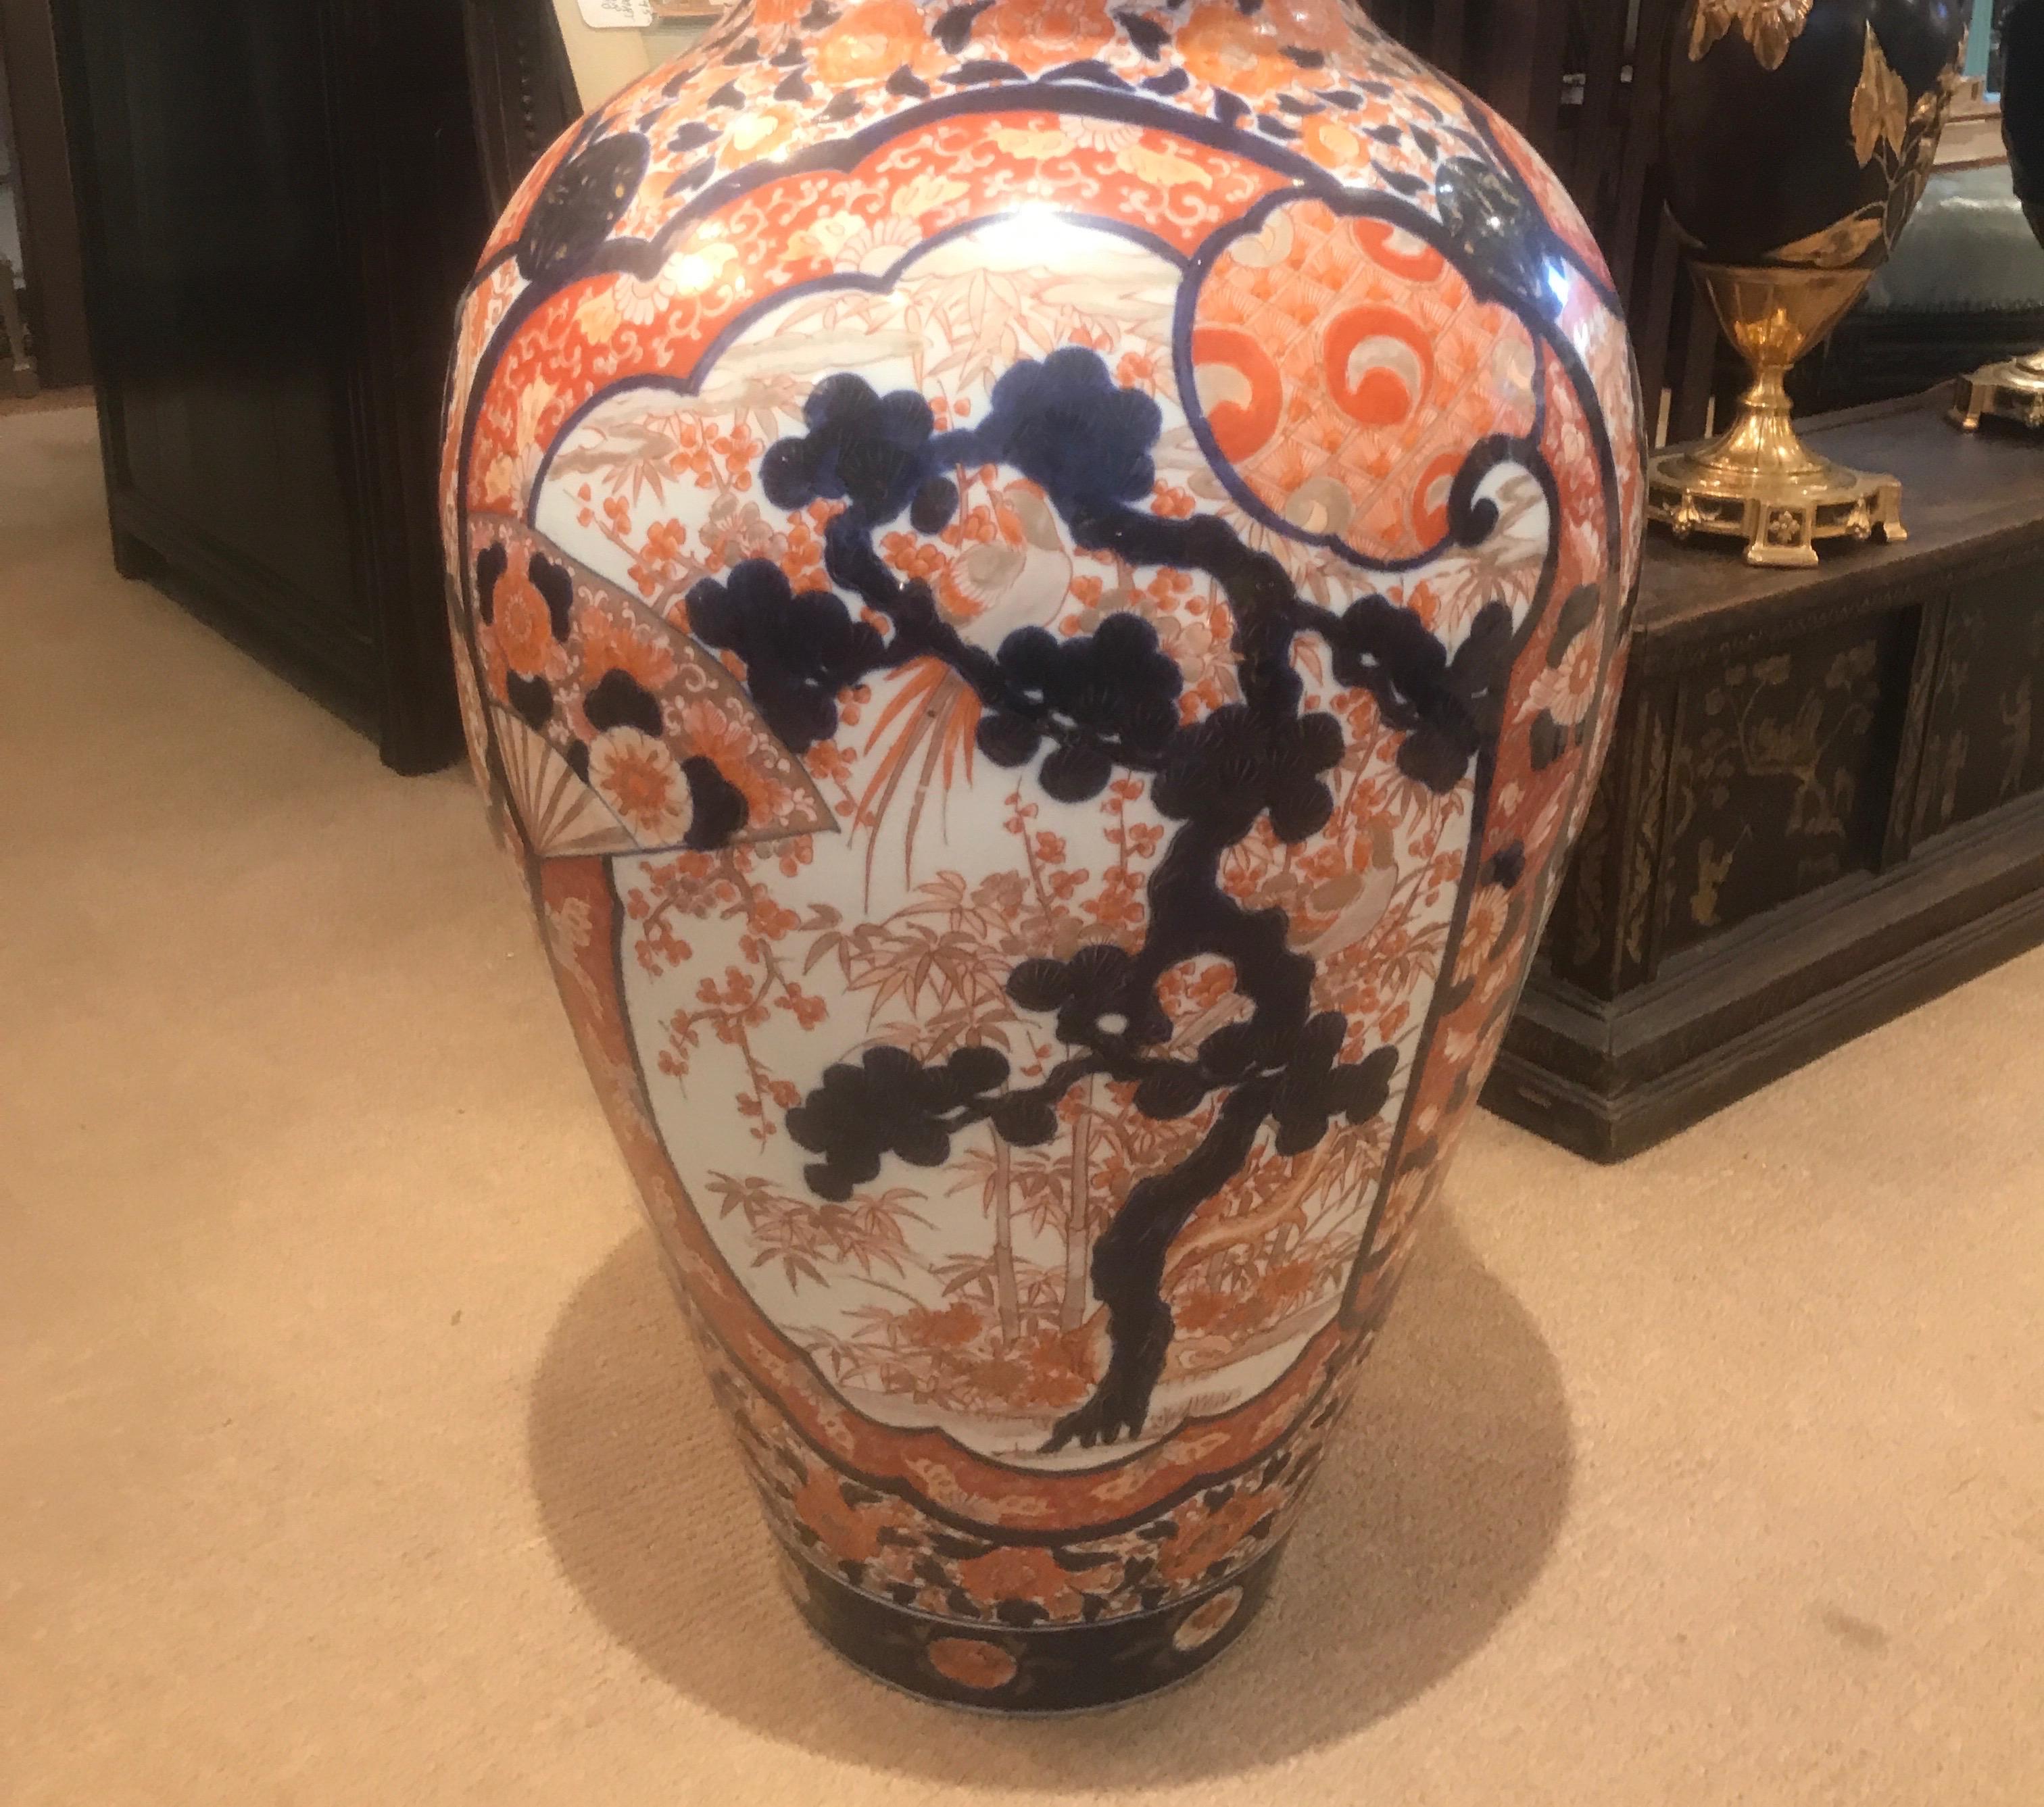 Japanese Imari porcelain floor vase with hand painted iron red and cobalt blue decoration. Meiji period 30